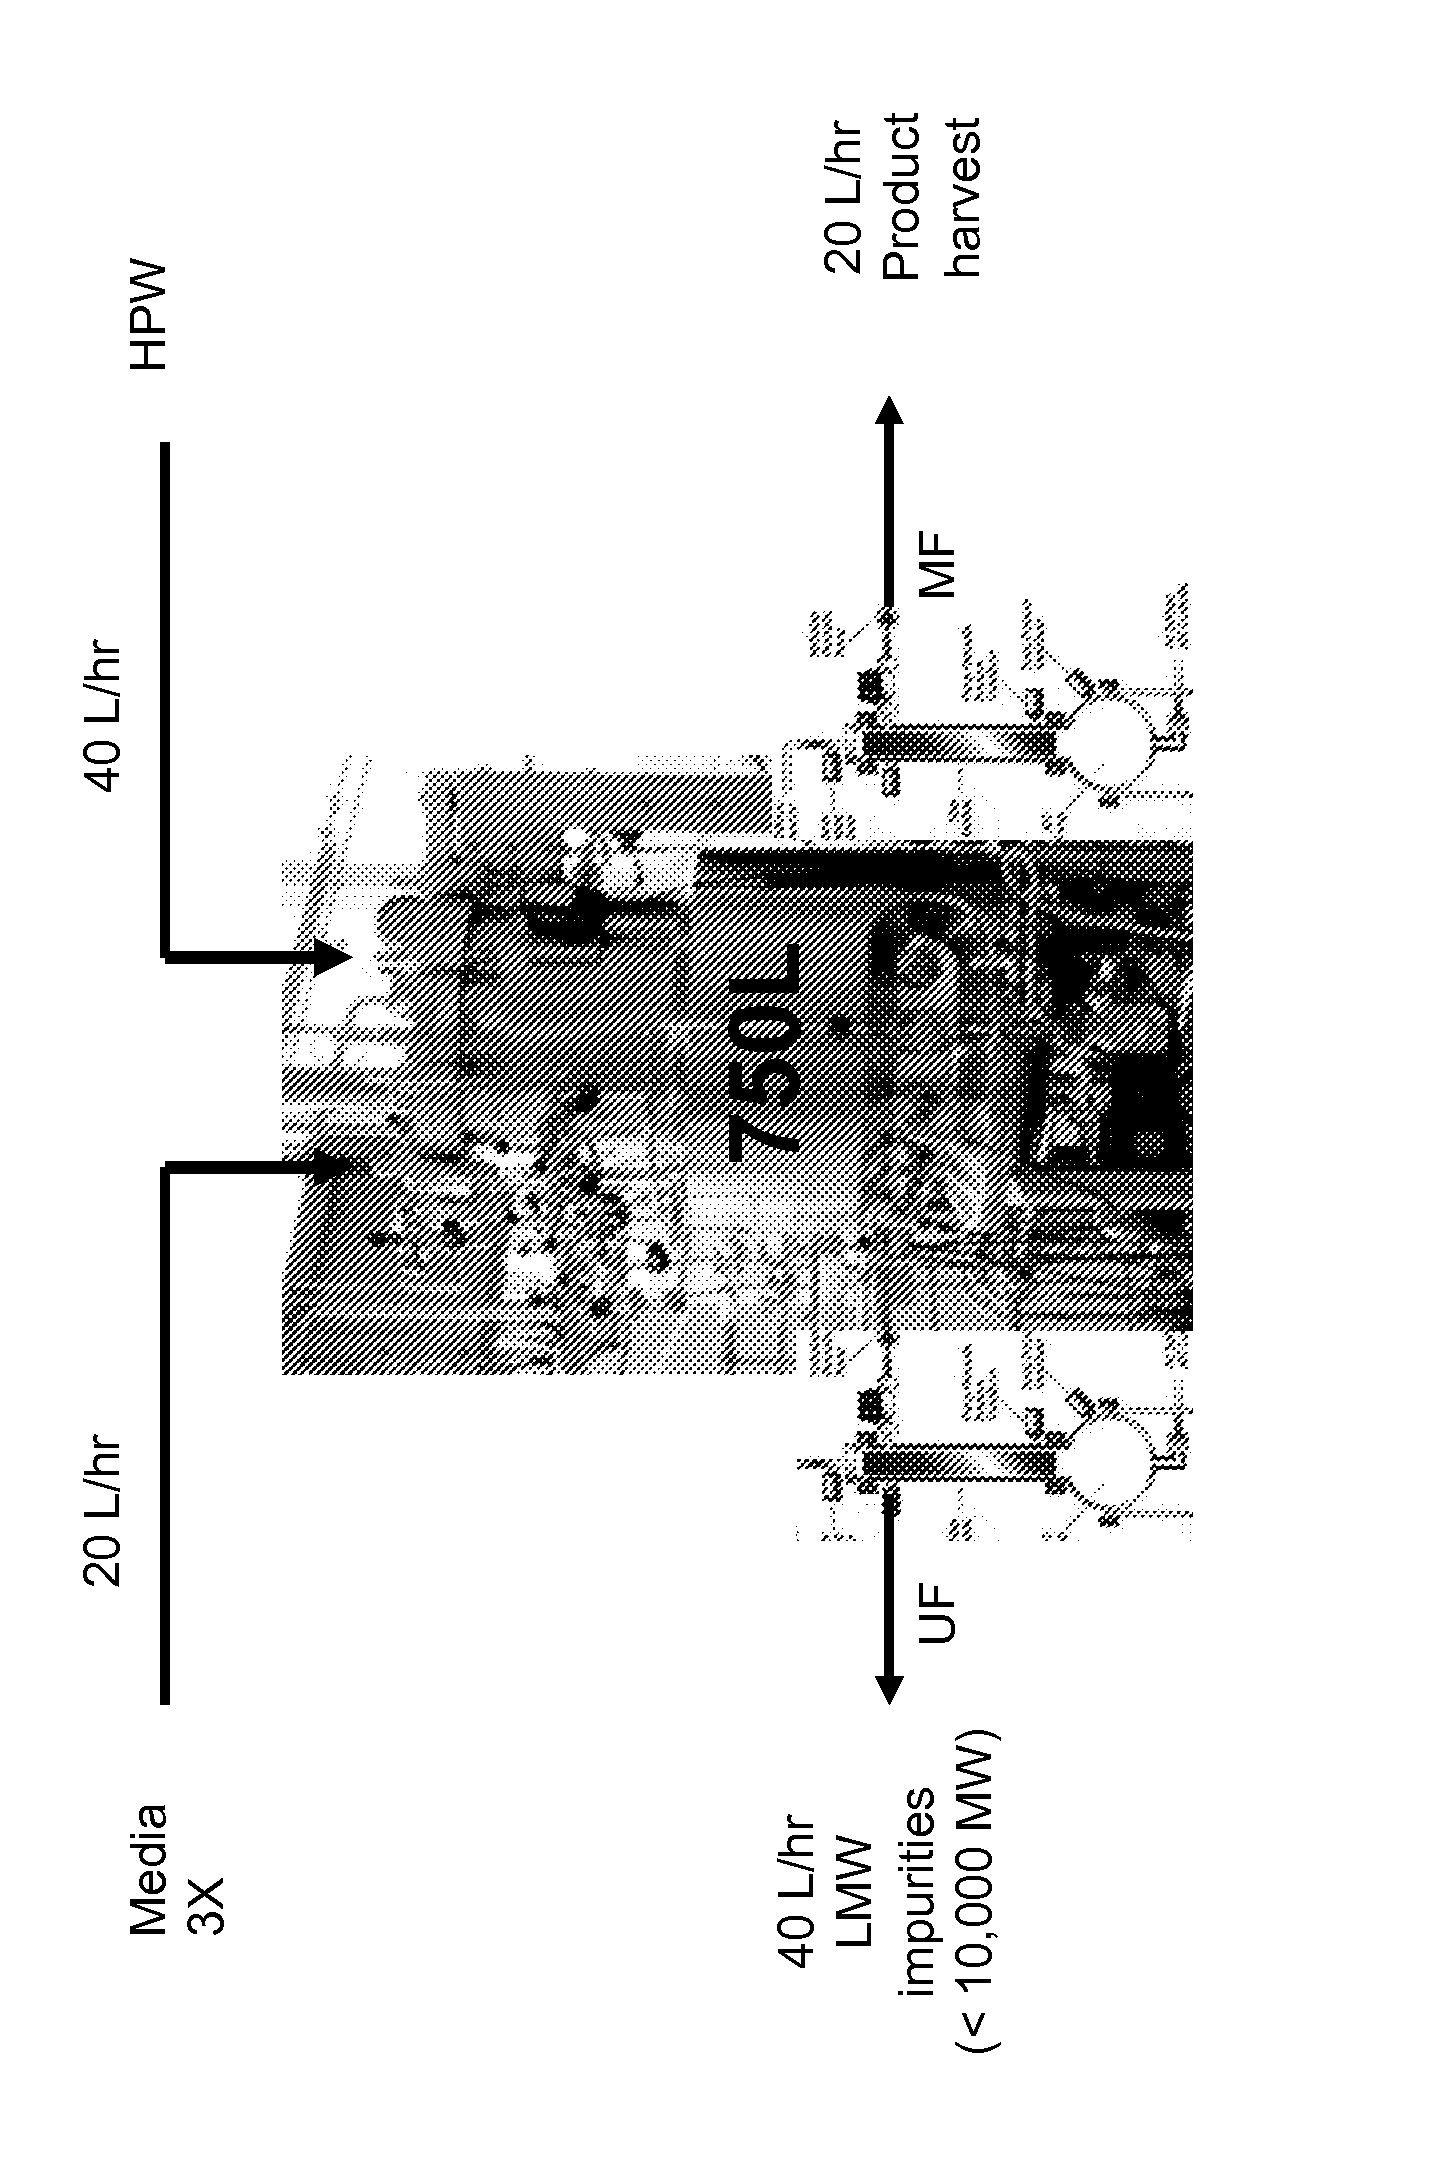 Method for producing a biopolymer (e.g. polypeptide) in a continuous fermentation process